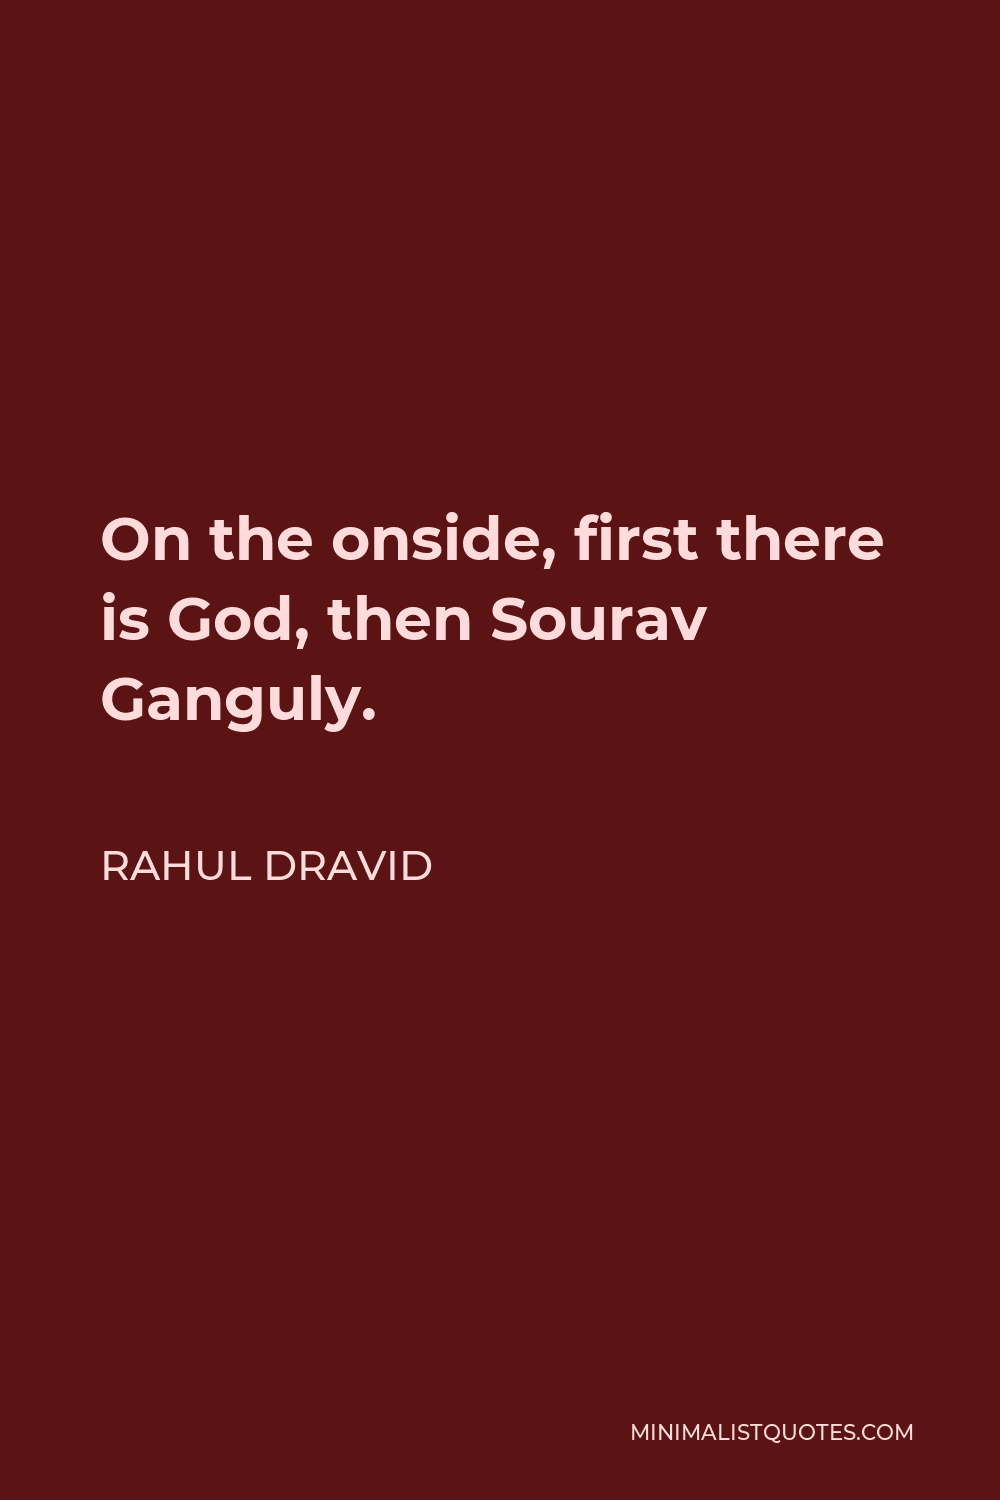 Rahul Dravid Quote - On the onside, first there is God, then Sourav Ganguly.